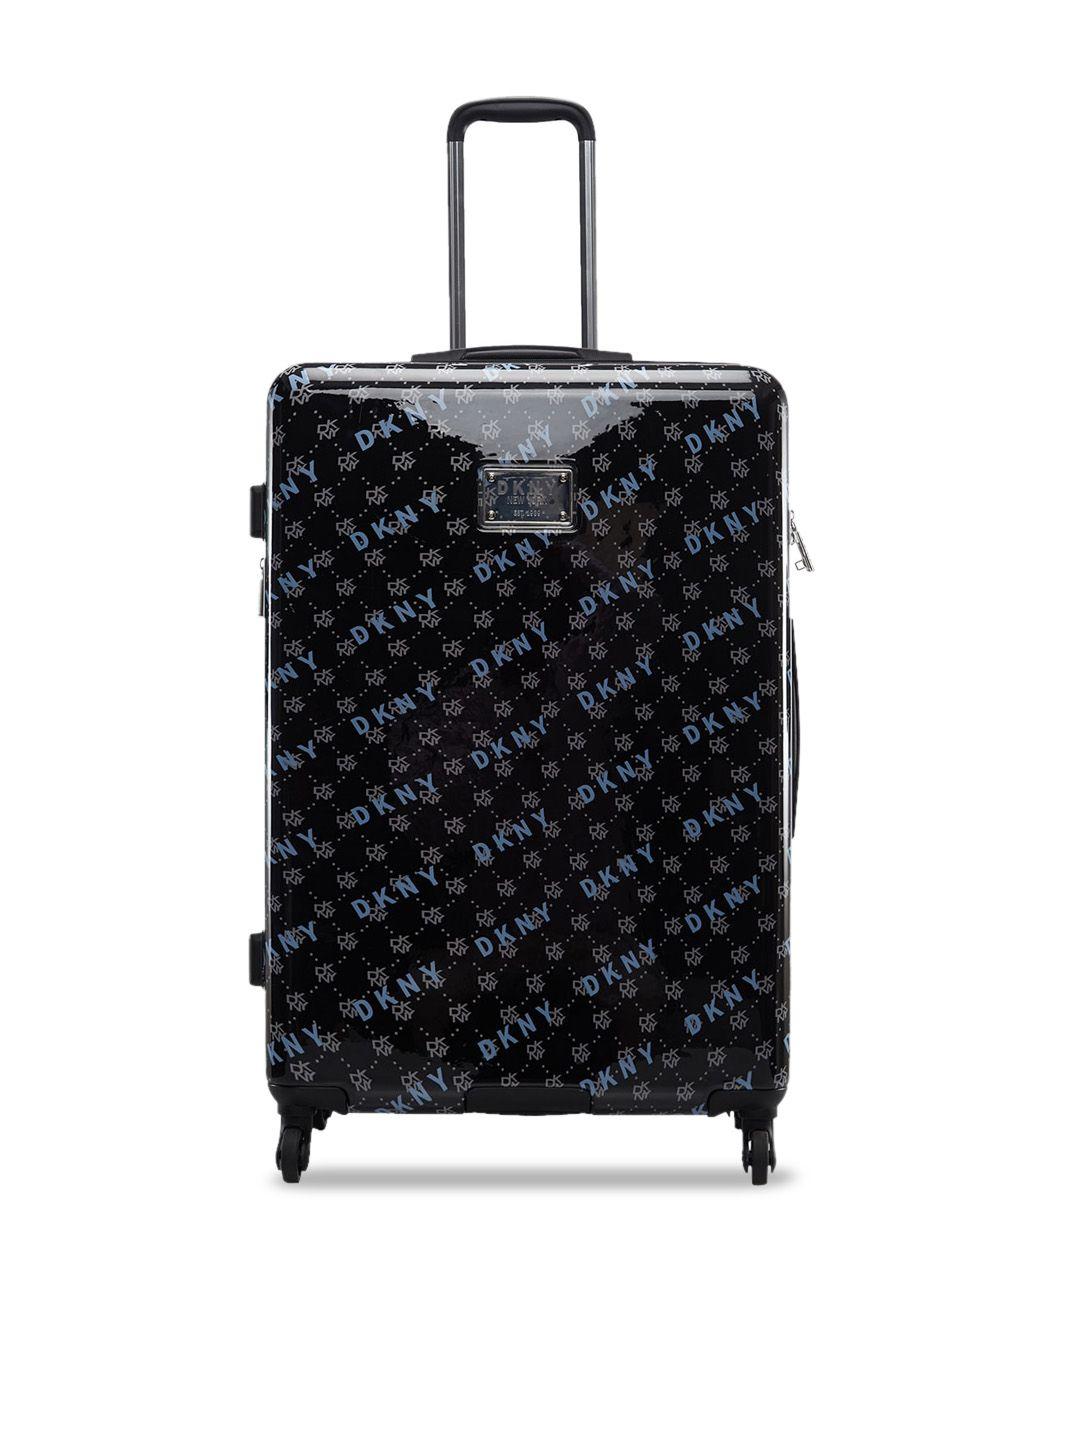 dkny on repeat printed hard-sided large abs trolley suitcase